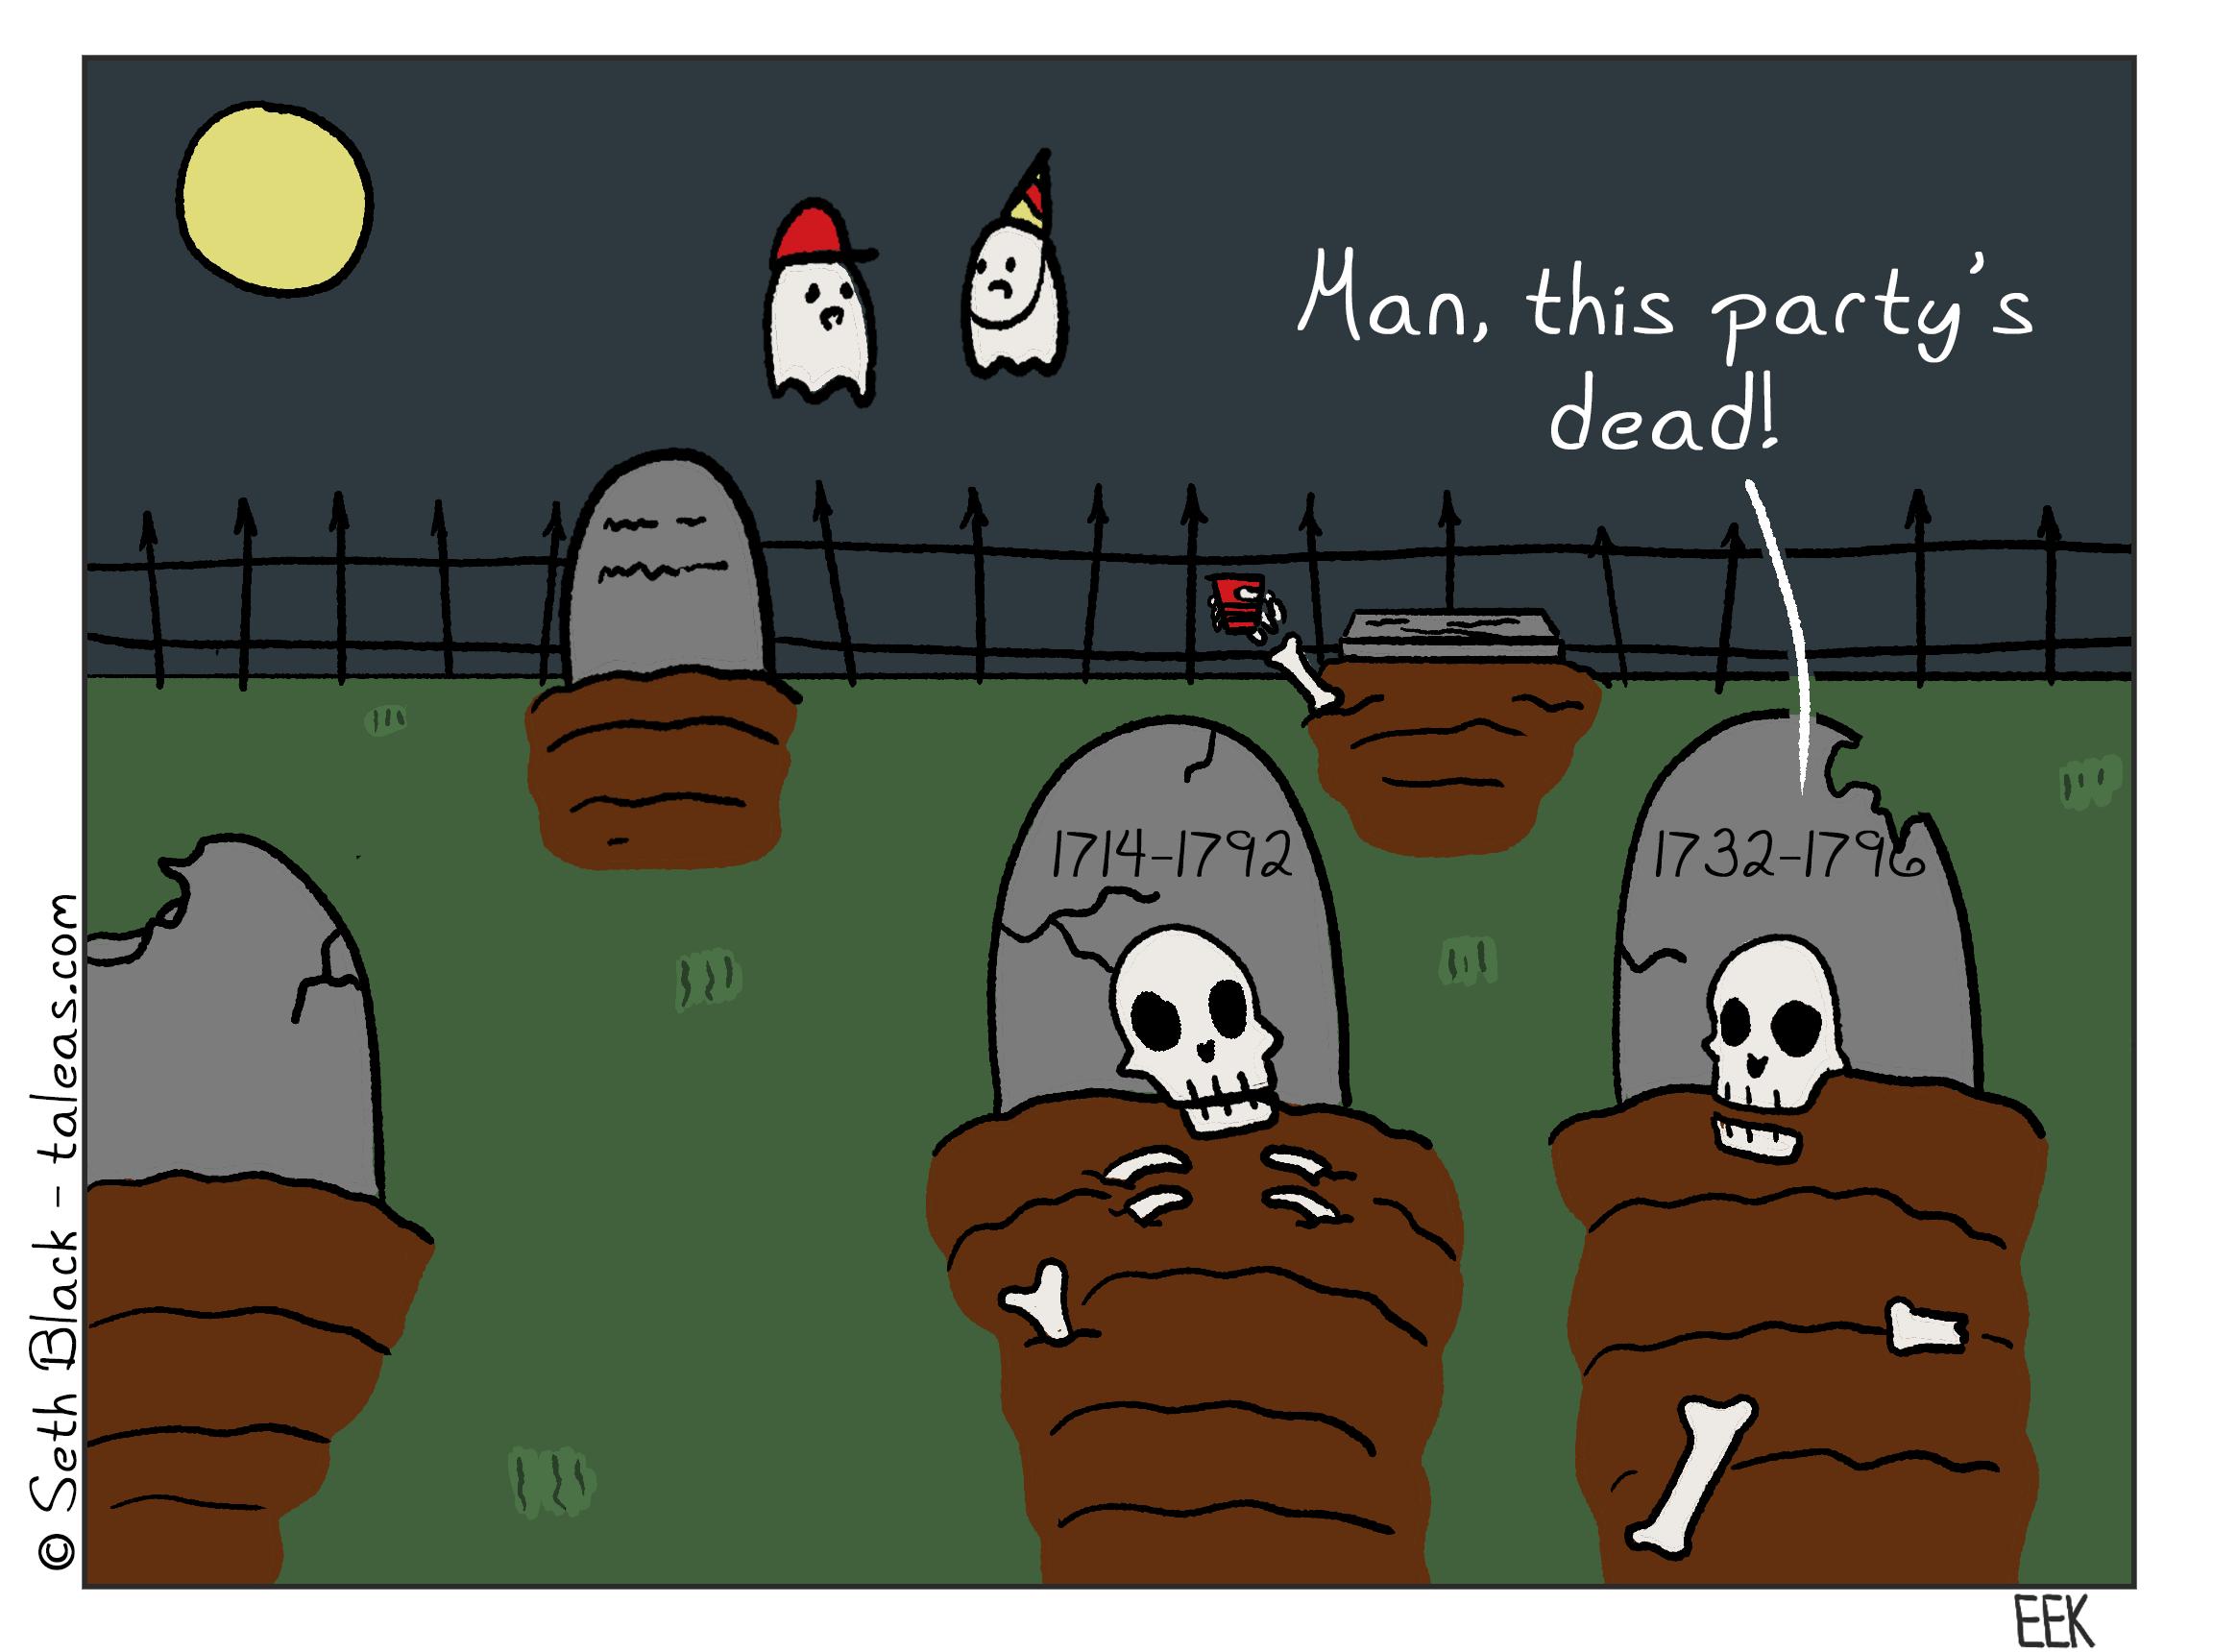 Two partial skeletons stick out of their graves in an old cemetery with numerous broken headstones, surrounded by a broken-down fence. One skeleton states to the other skeleton, "Man, this party's dead." A skeletal arm sticks out of another grave holding a red solo cup. Two ghosts (one wearing a baseball cap and the other in a party hat) chat unassumingly in the background.